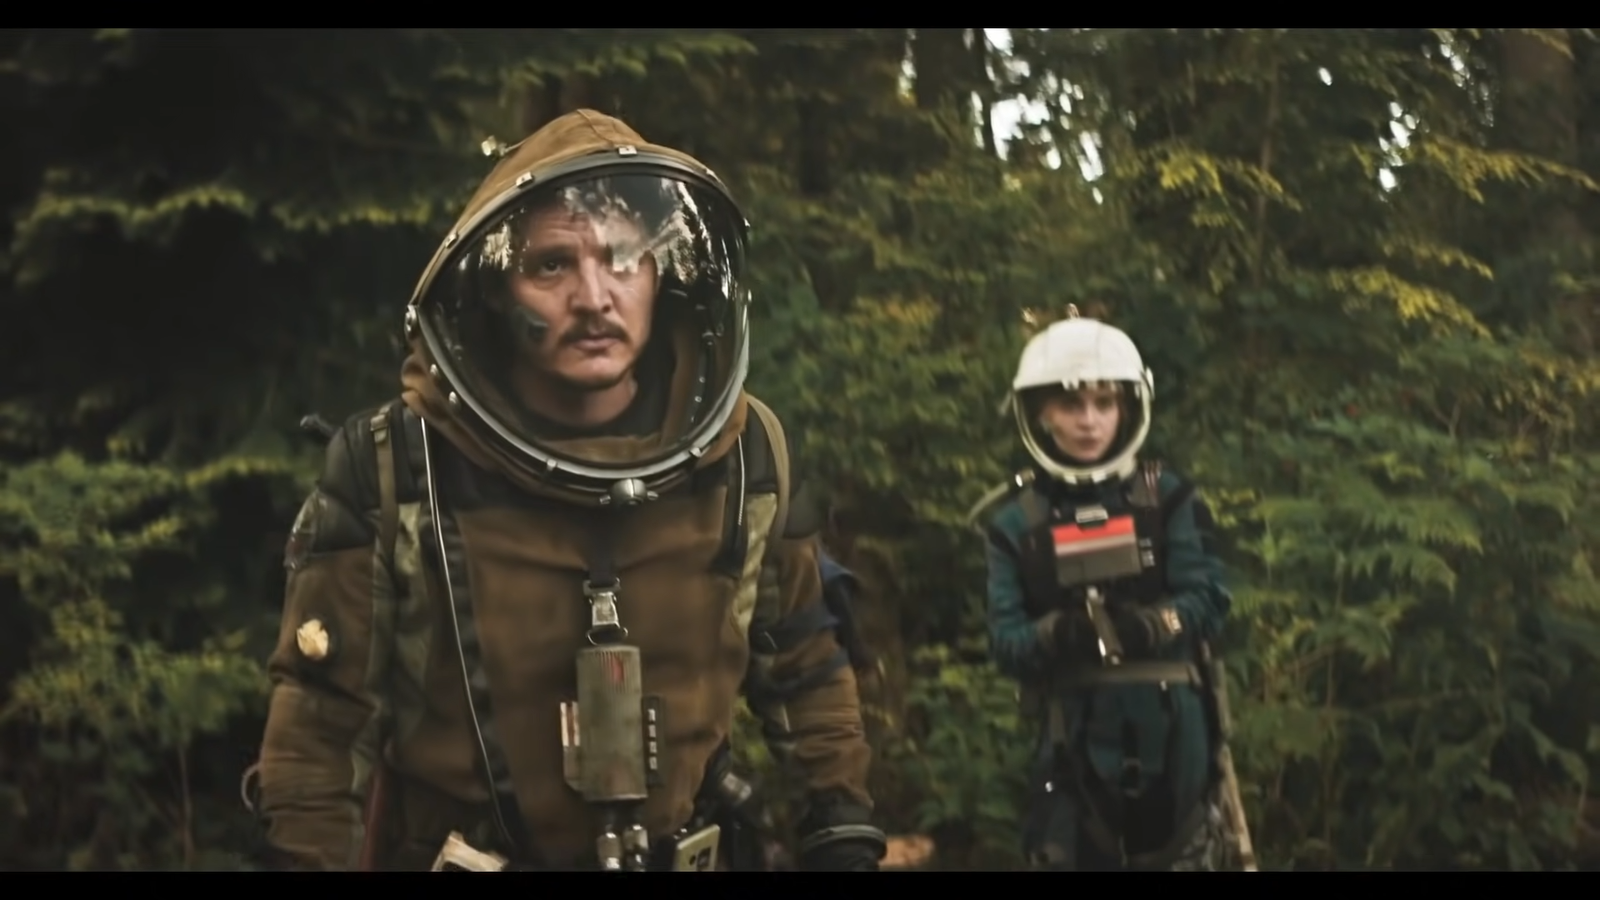 two characters in protective suits near a tree line